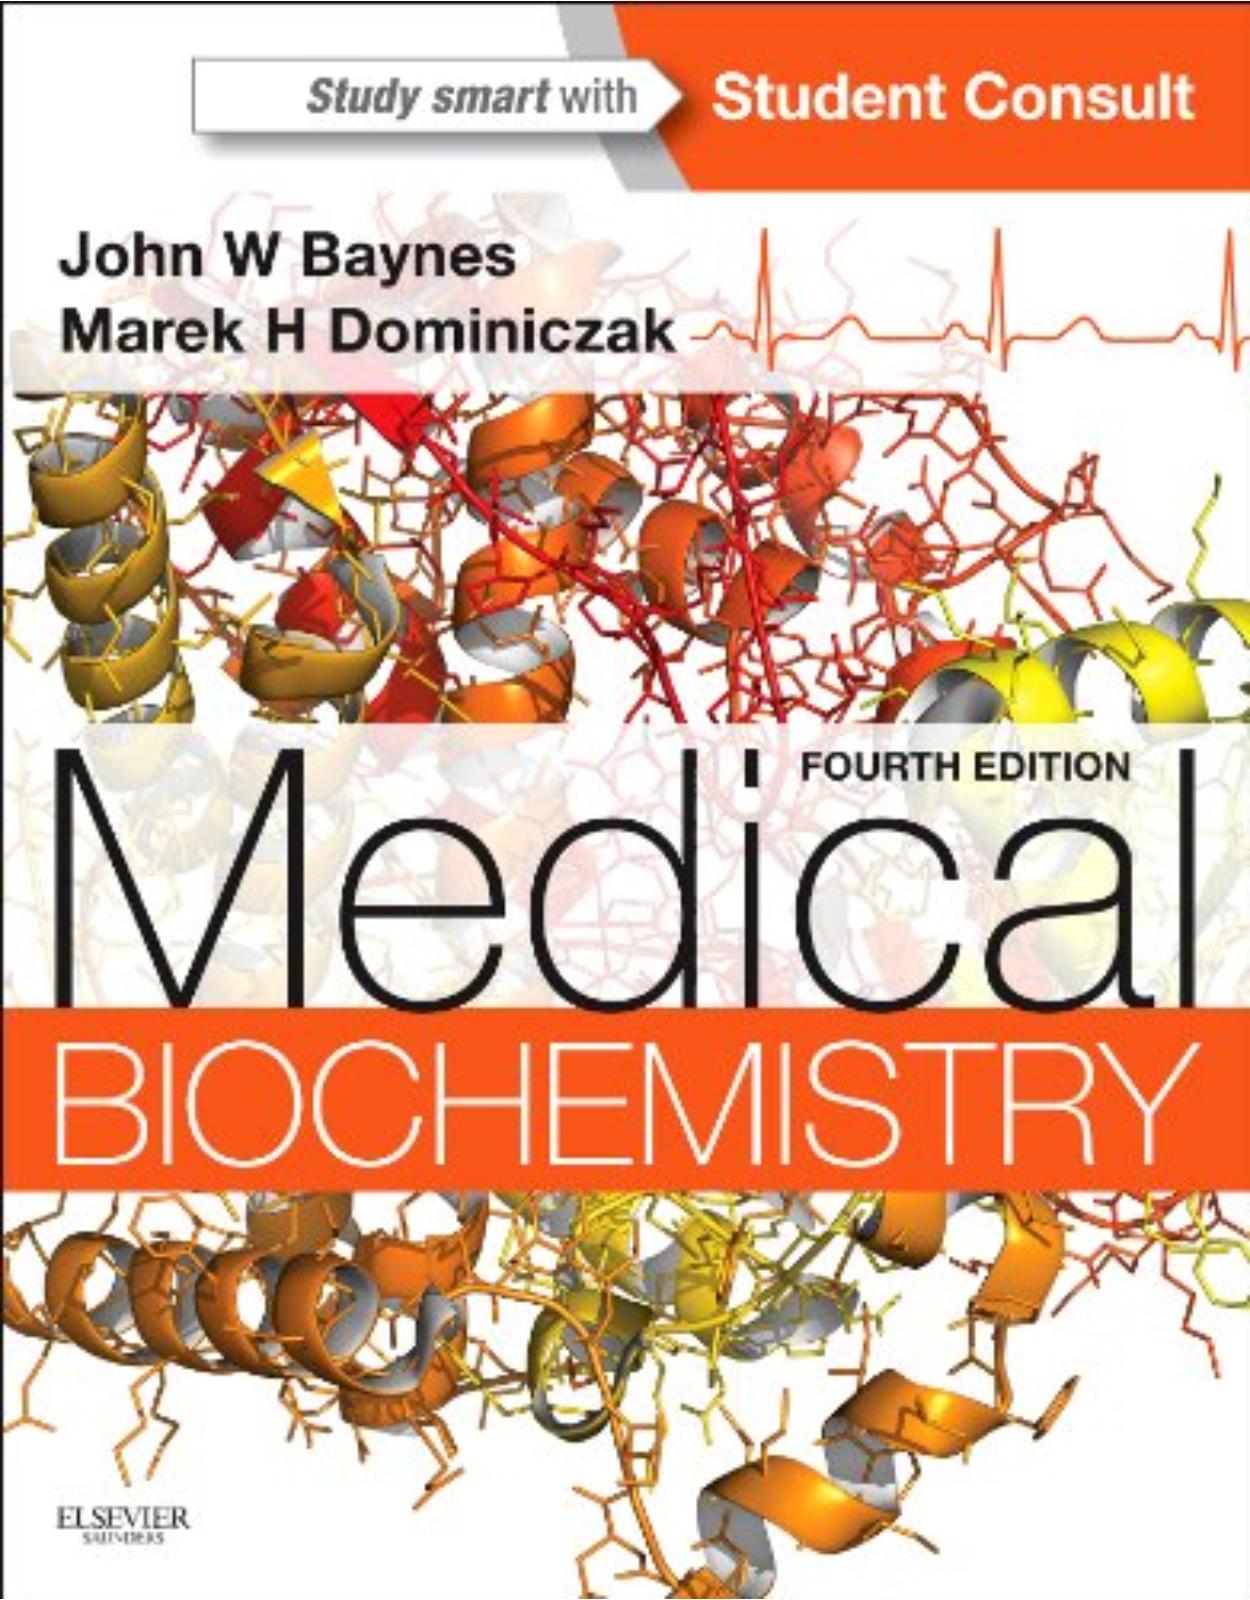 Medical Biochemistry: With STUDENT CONSULT Online Access, 4e (Medial Biochemistry)